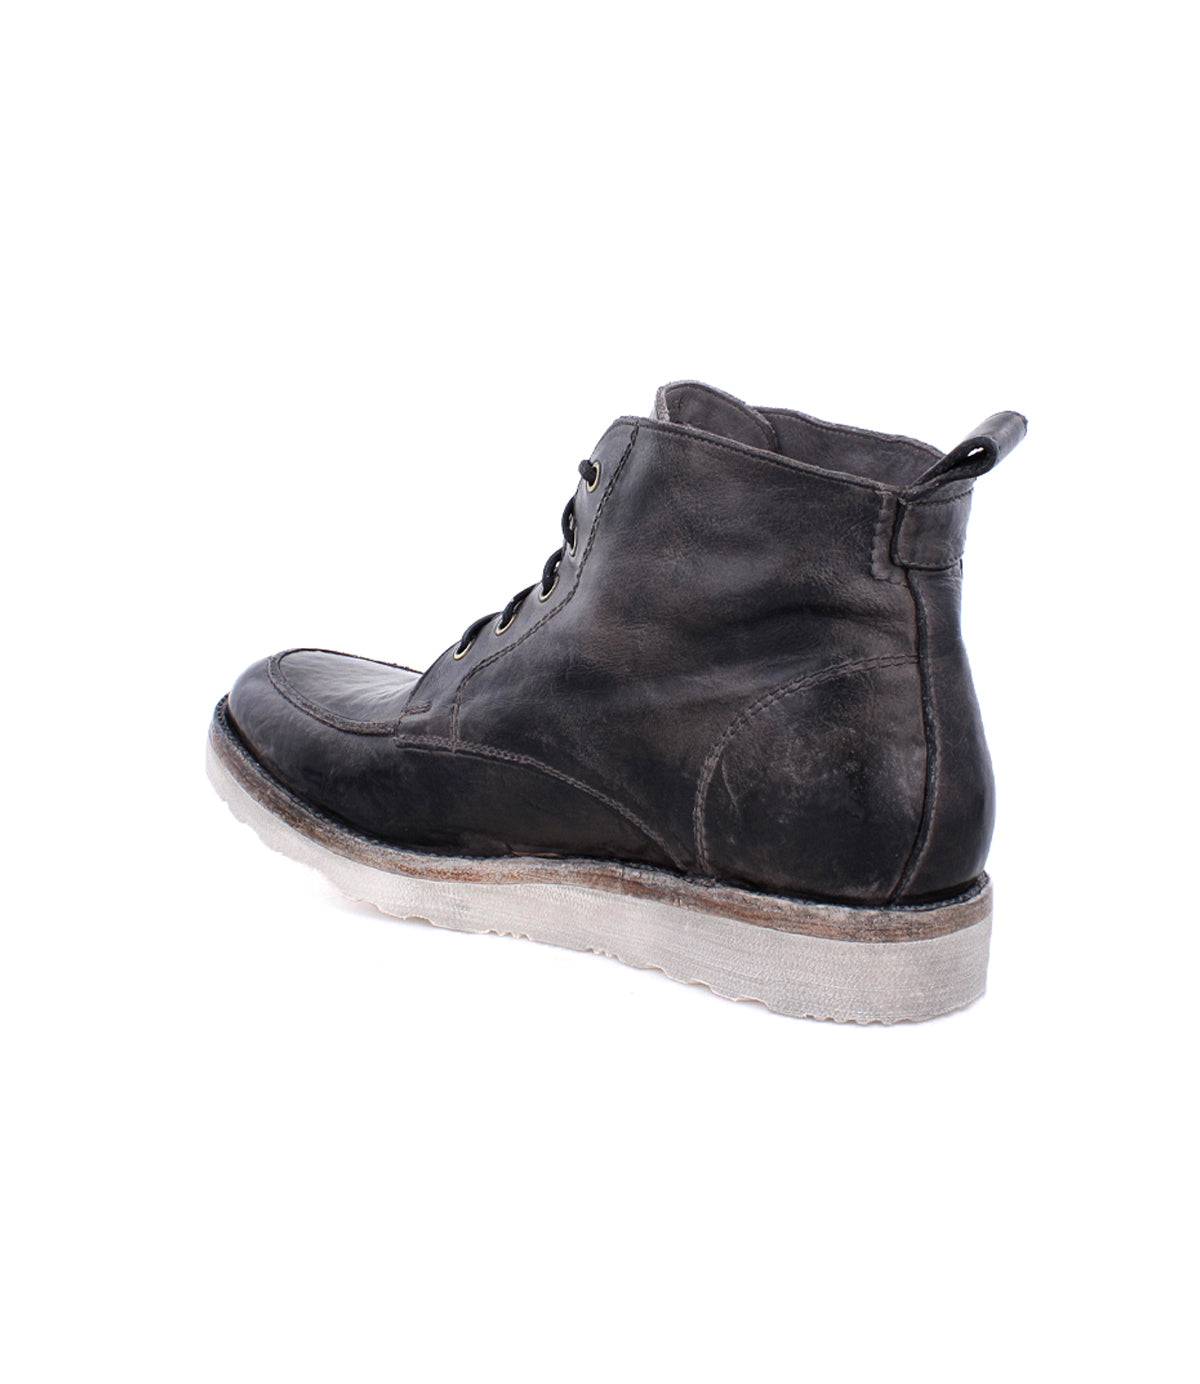 A men's Lincoln black leather boot with laces and a white sole by Bed Stu.